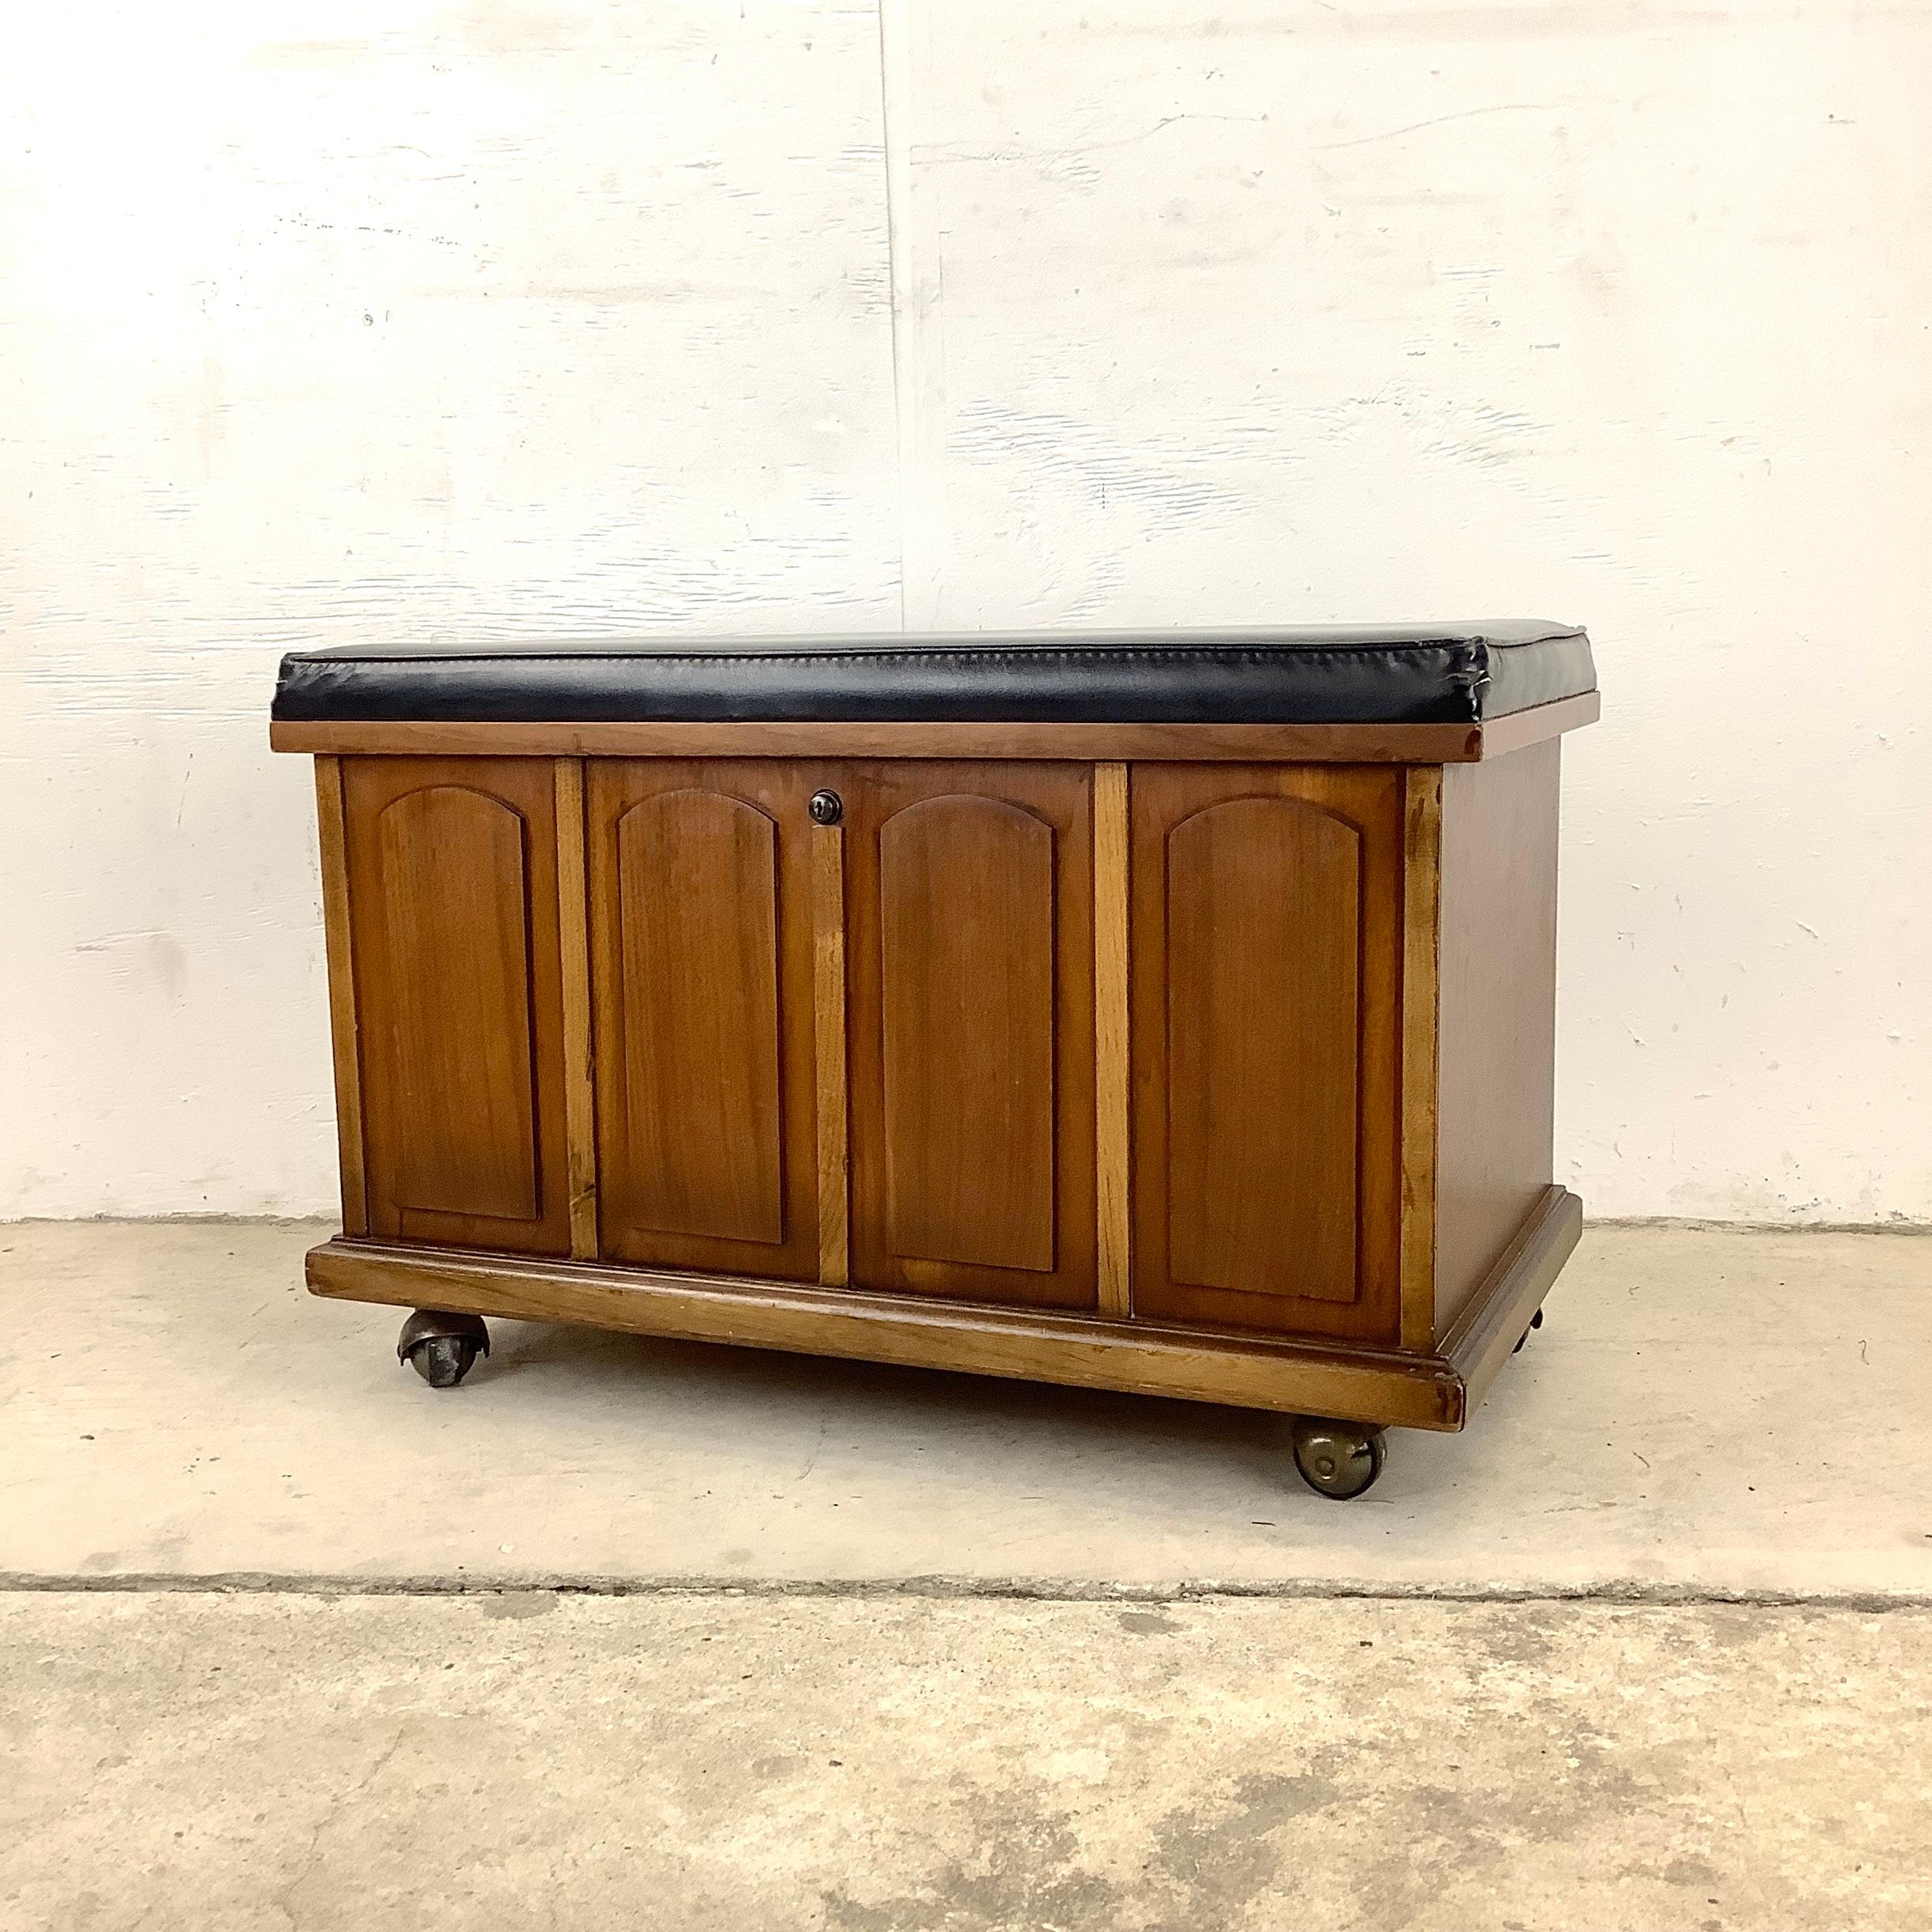 This stylish midcentury walnut storage bench features a vintage wood finish, vinyl top with interior record storage, and simple modern lines. The interior dividers also have removable shelves for extra versatility. Quality design from Lane Furniture